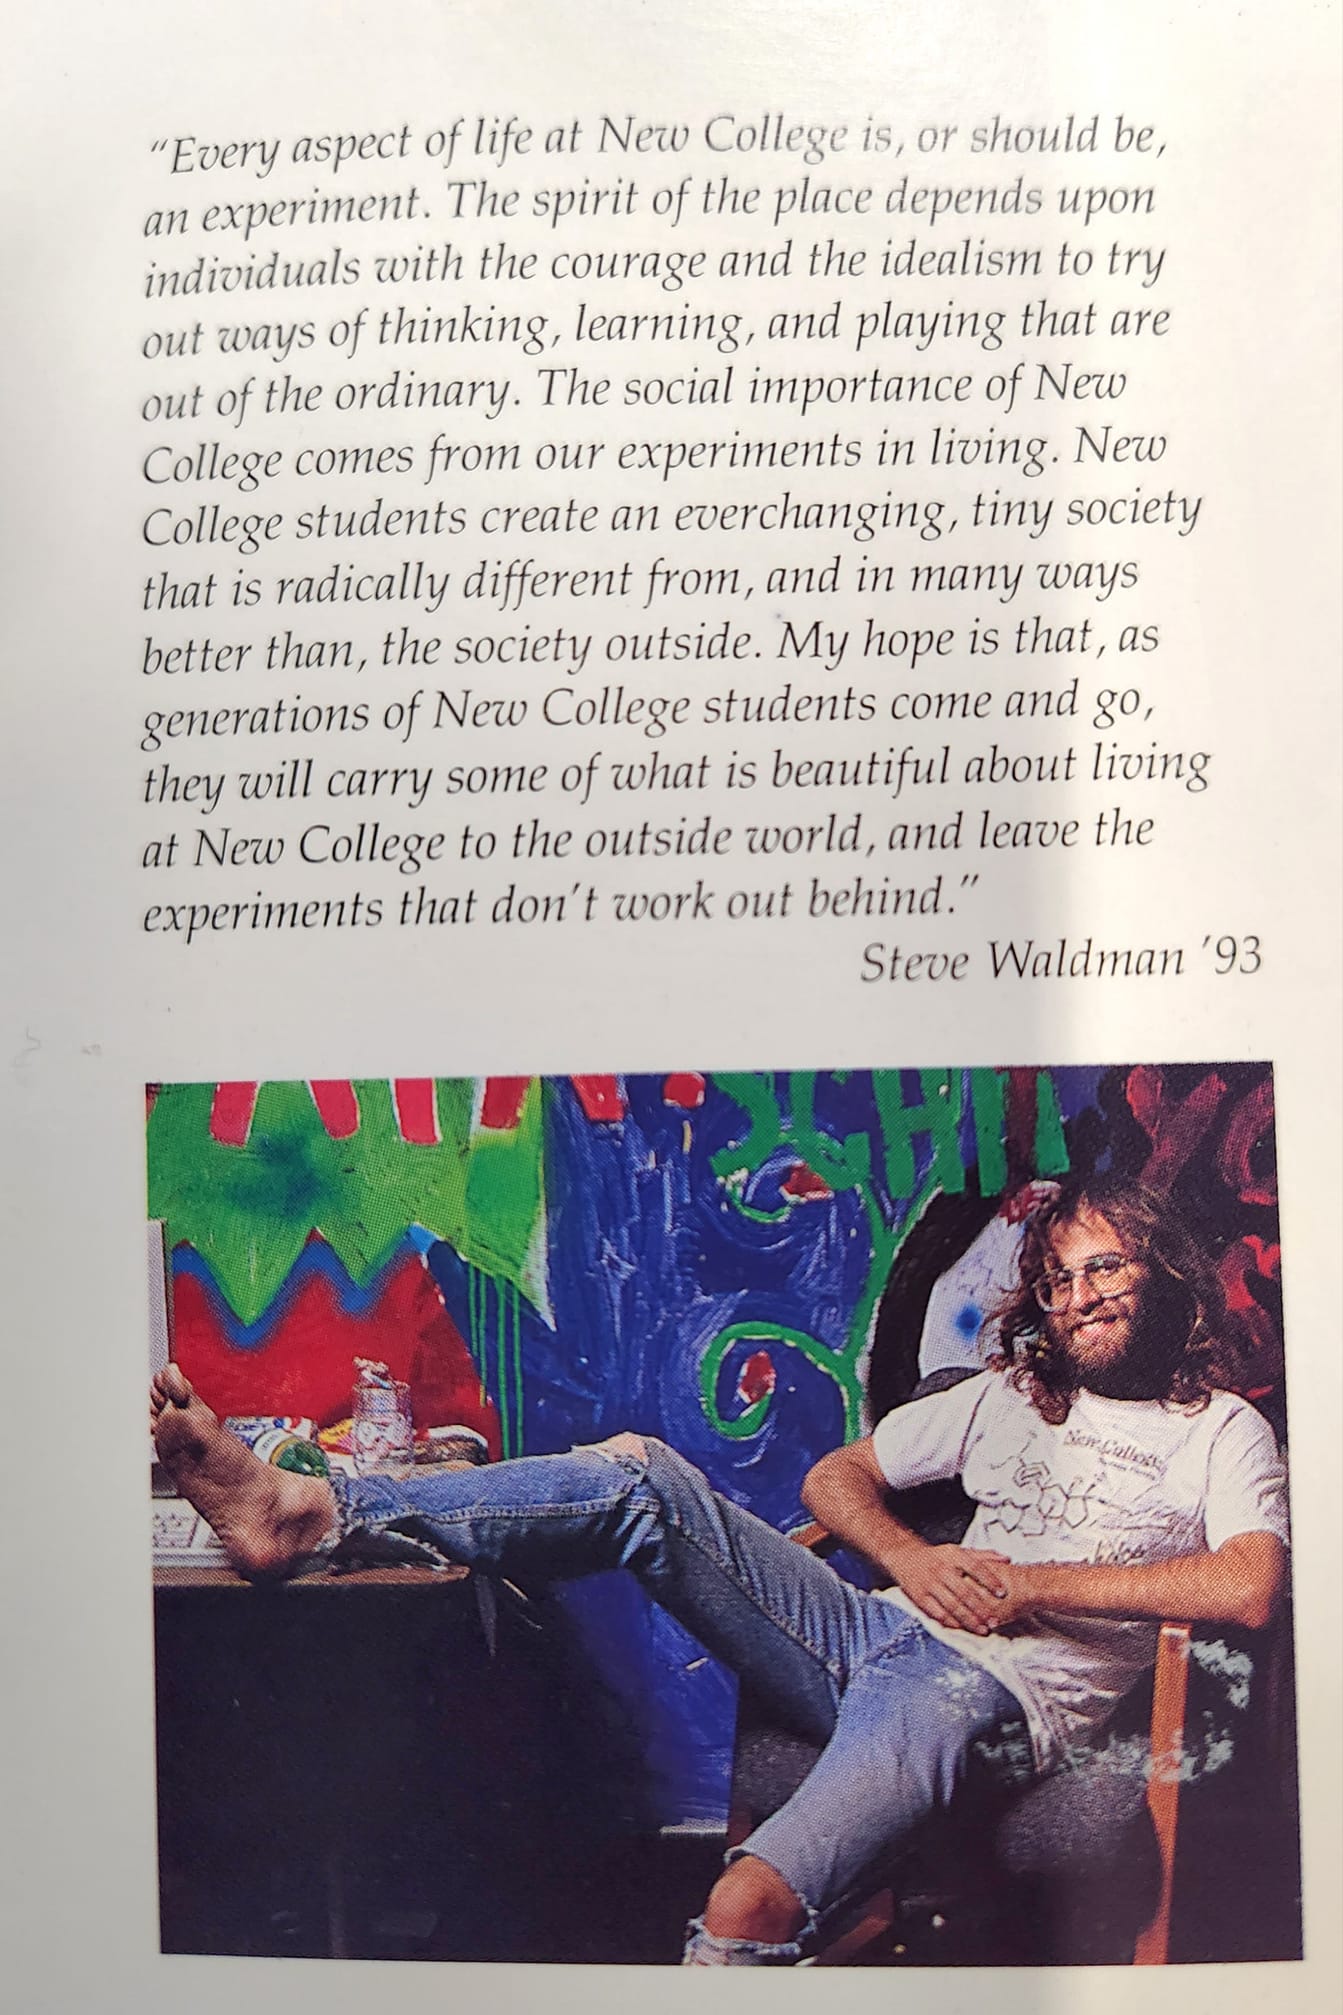 a quote and photo of the author, spewing the same views he spews here, but in 1993